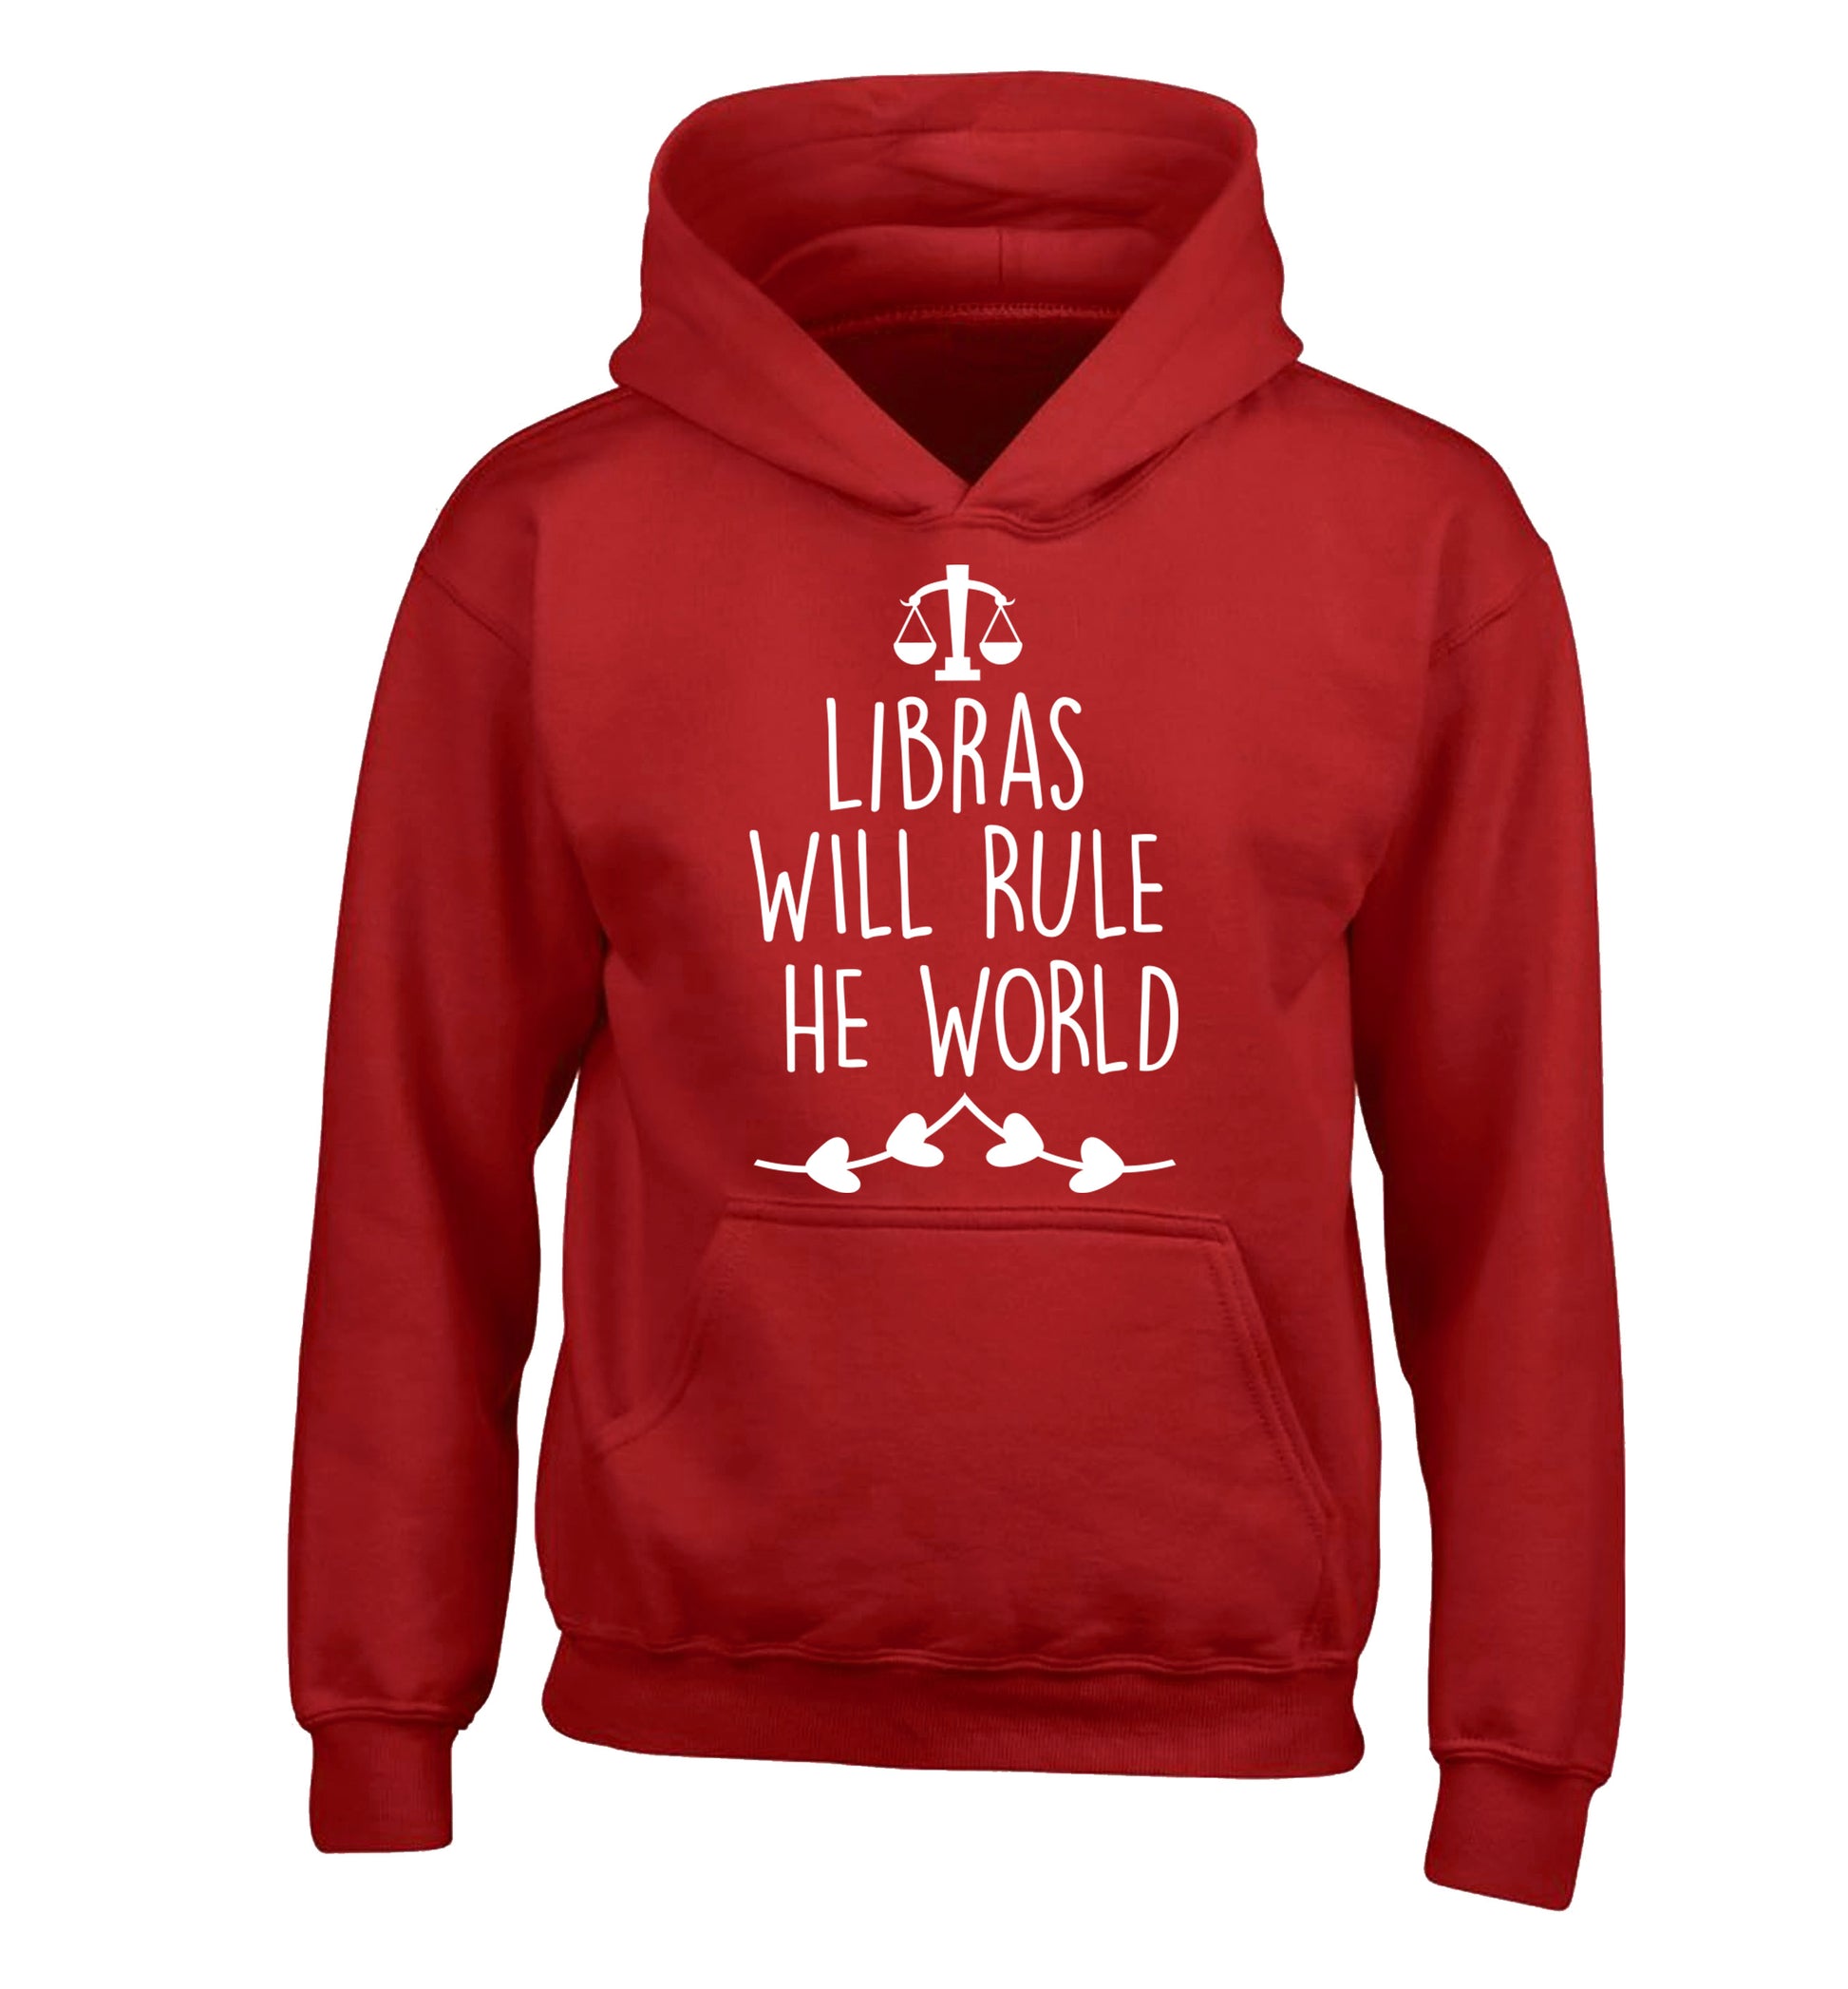 Libras will rule the world children's red hoodie 12-13 Years